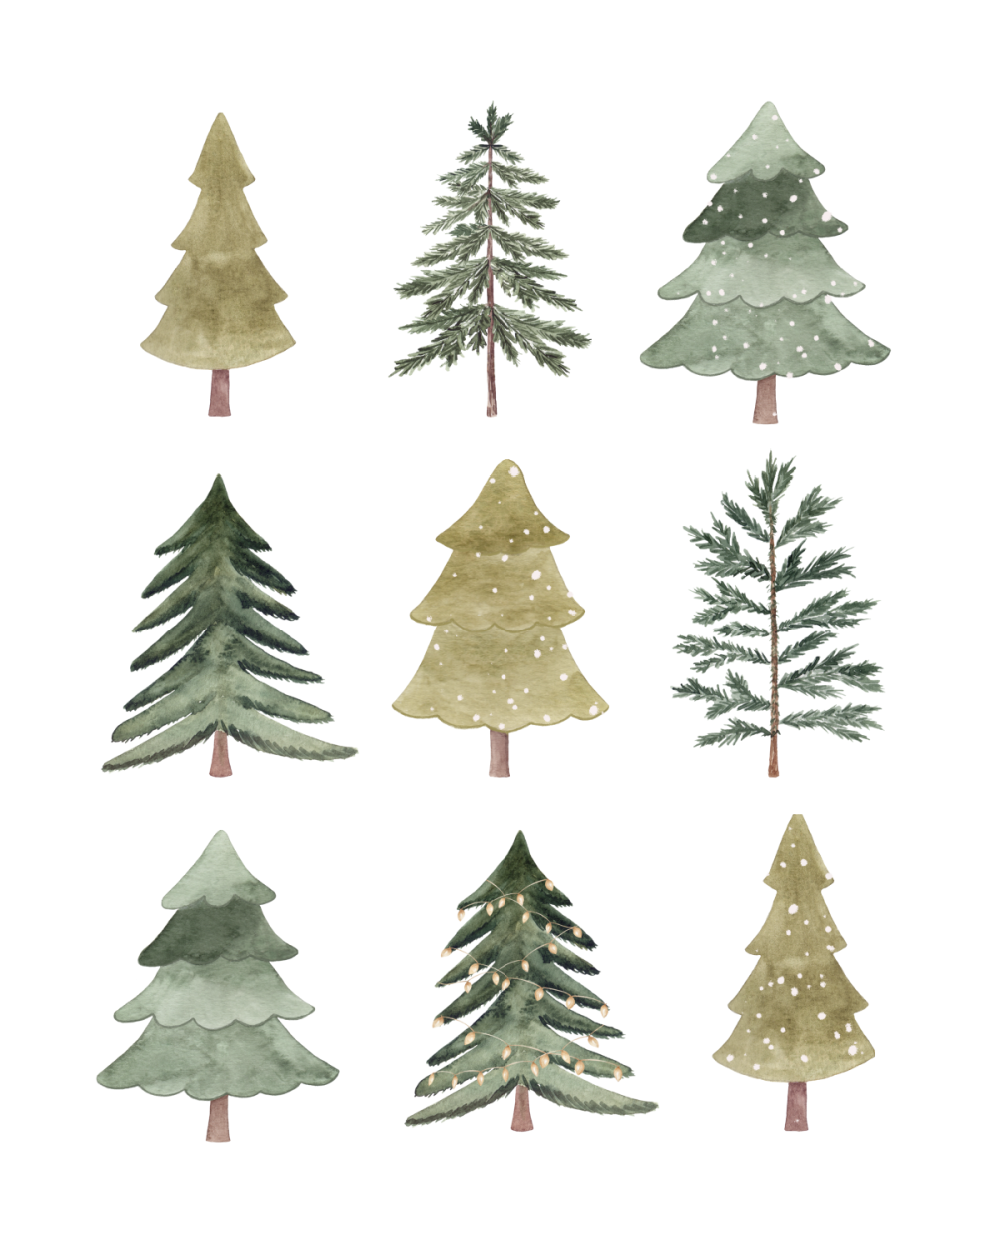 Christmas artwork with a grid of different Christmas trees.